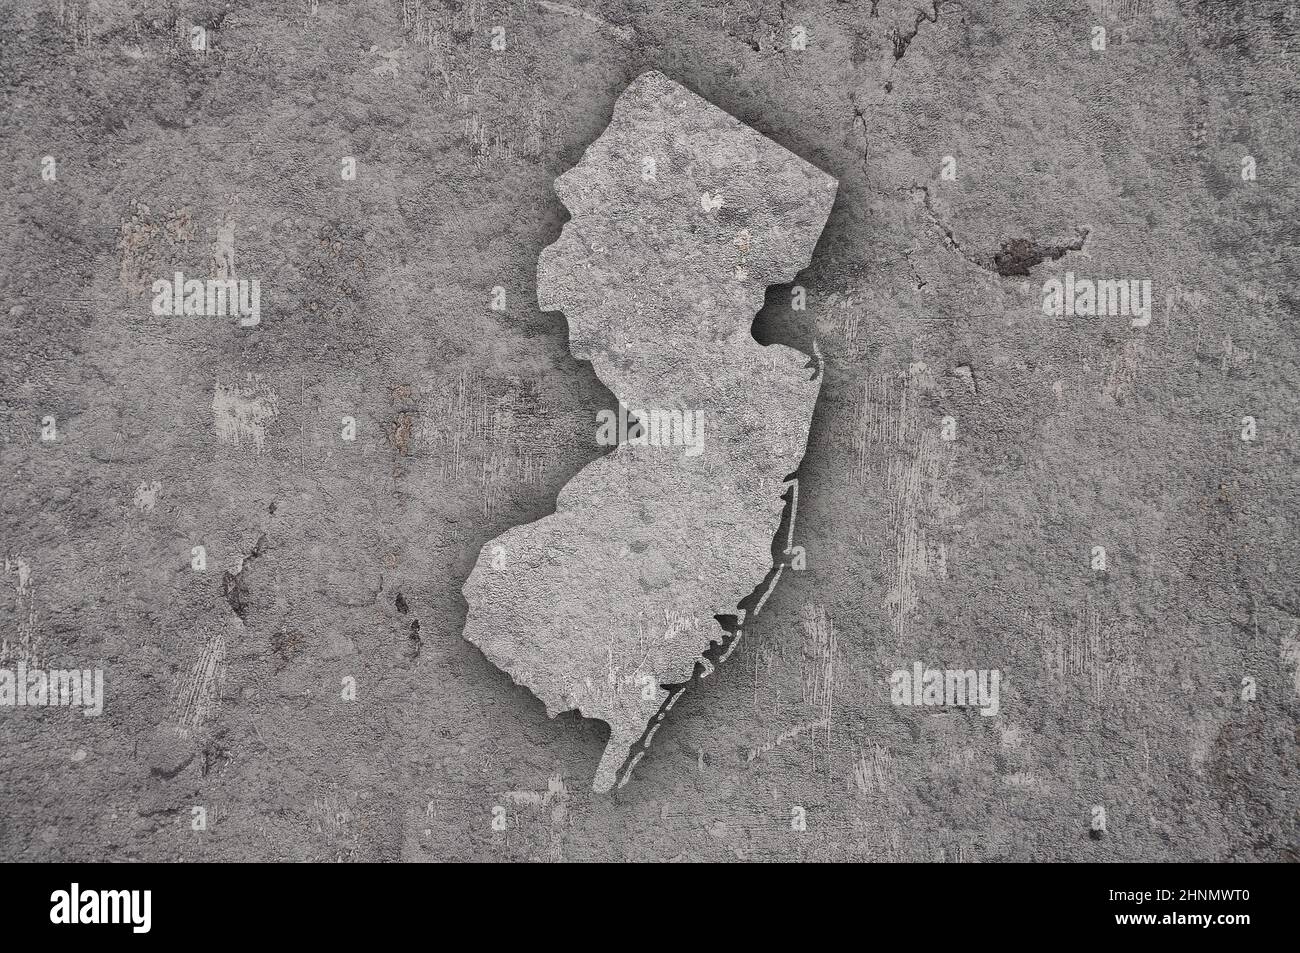 Map of New Jersey on weathered concrete Stock Photo